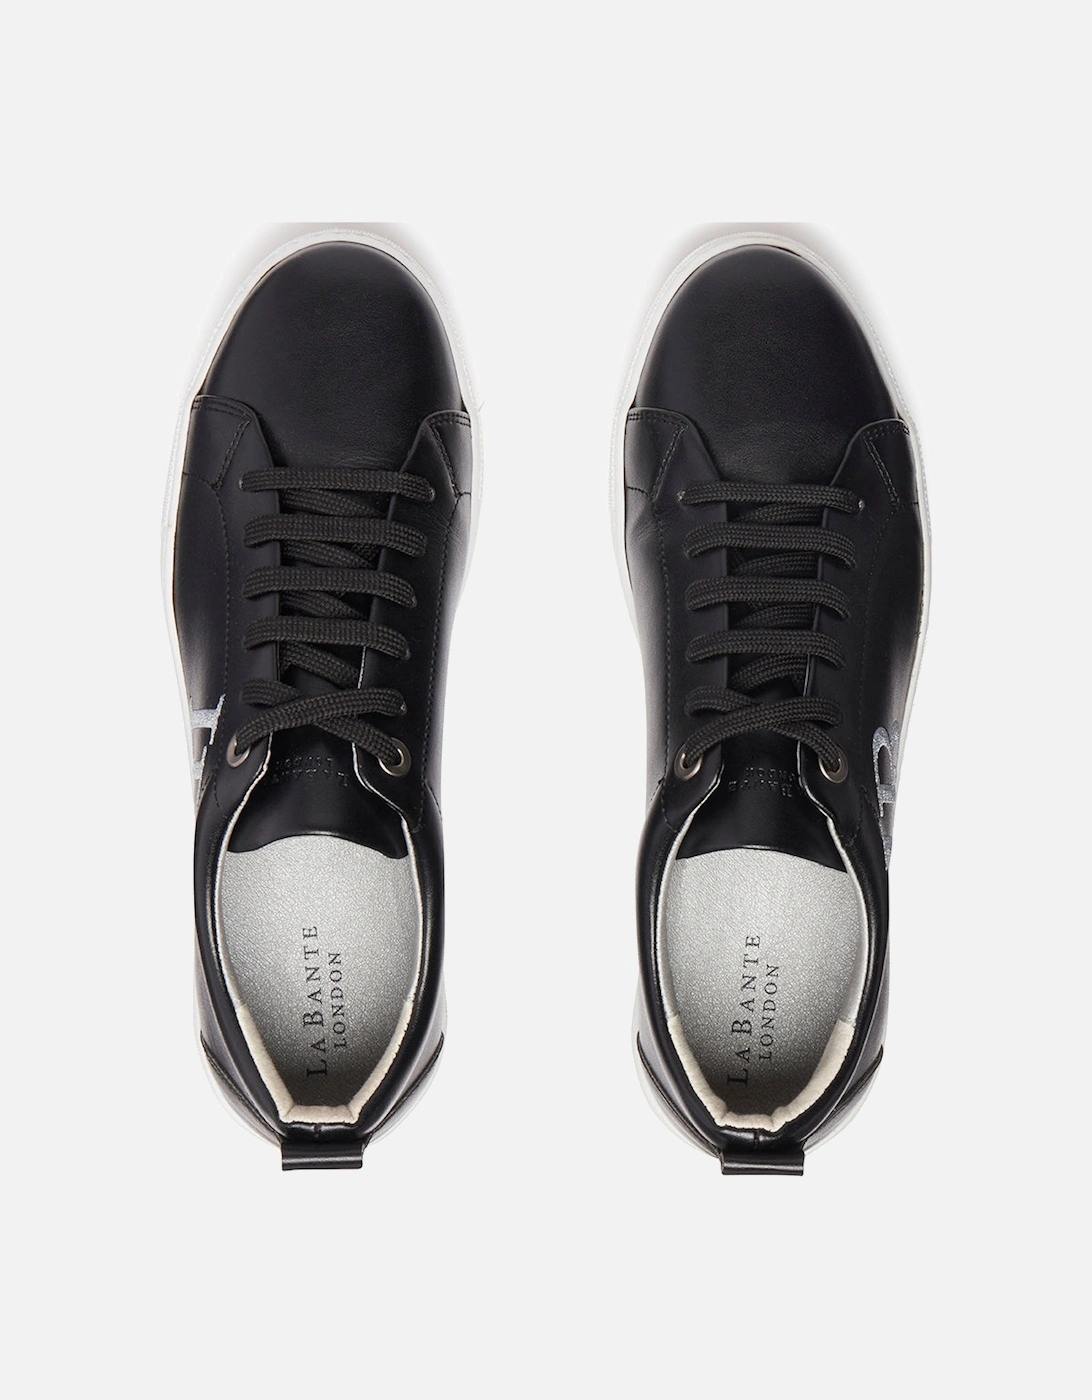 LB Black Apple Leather Sneakers for Women